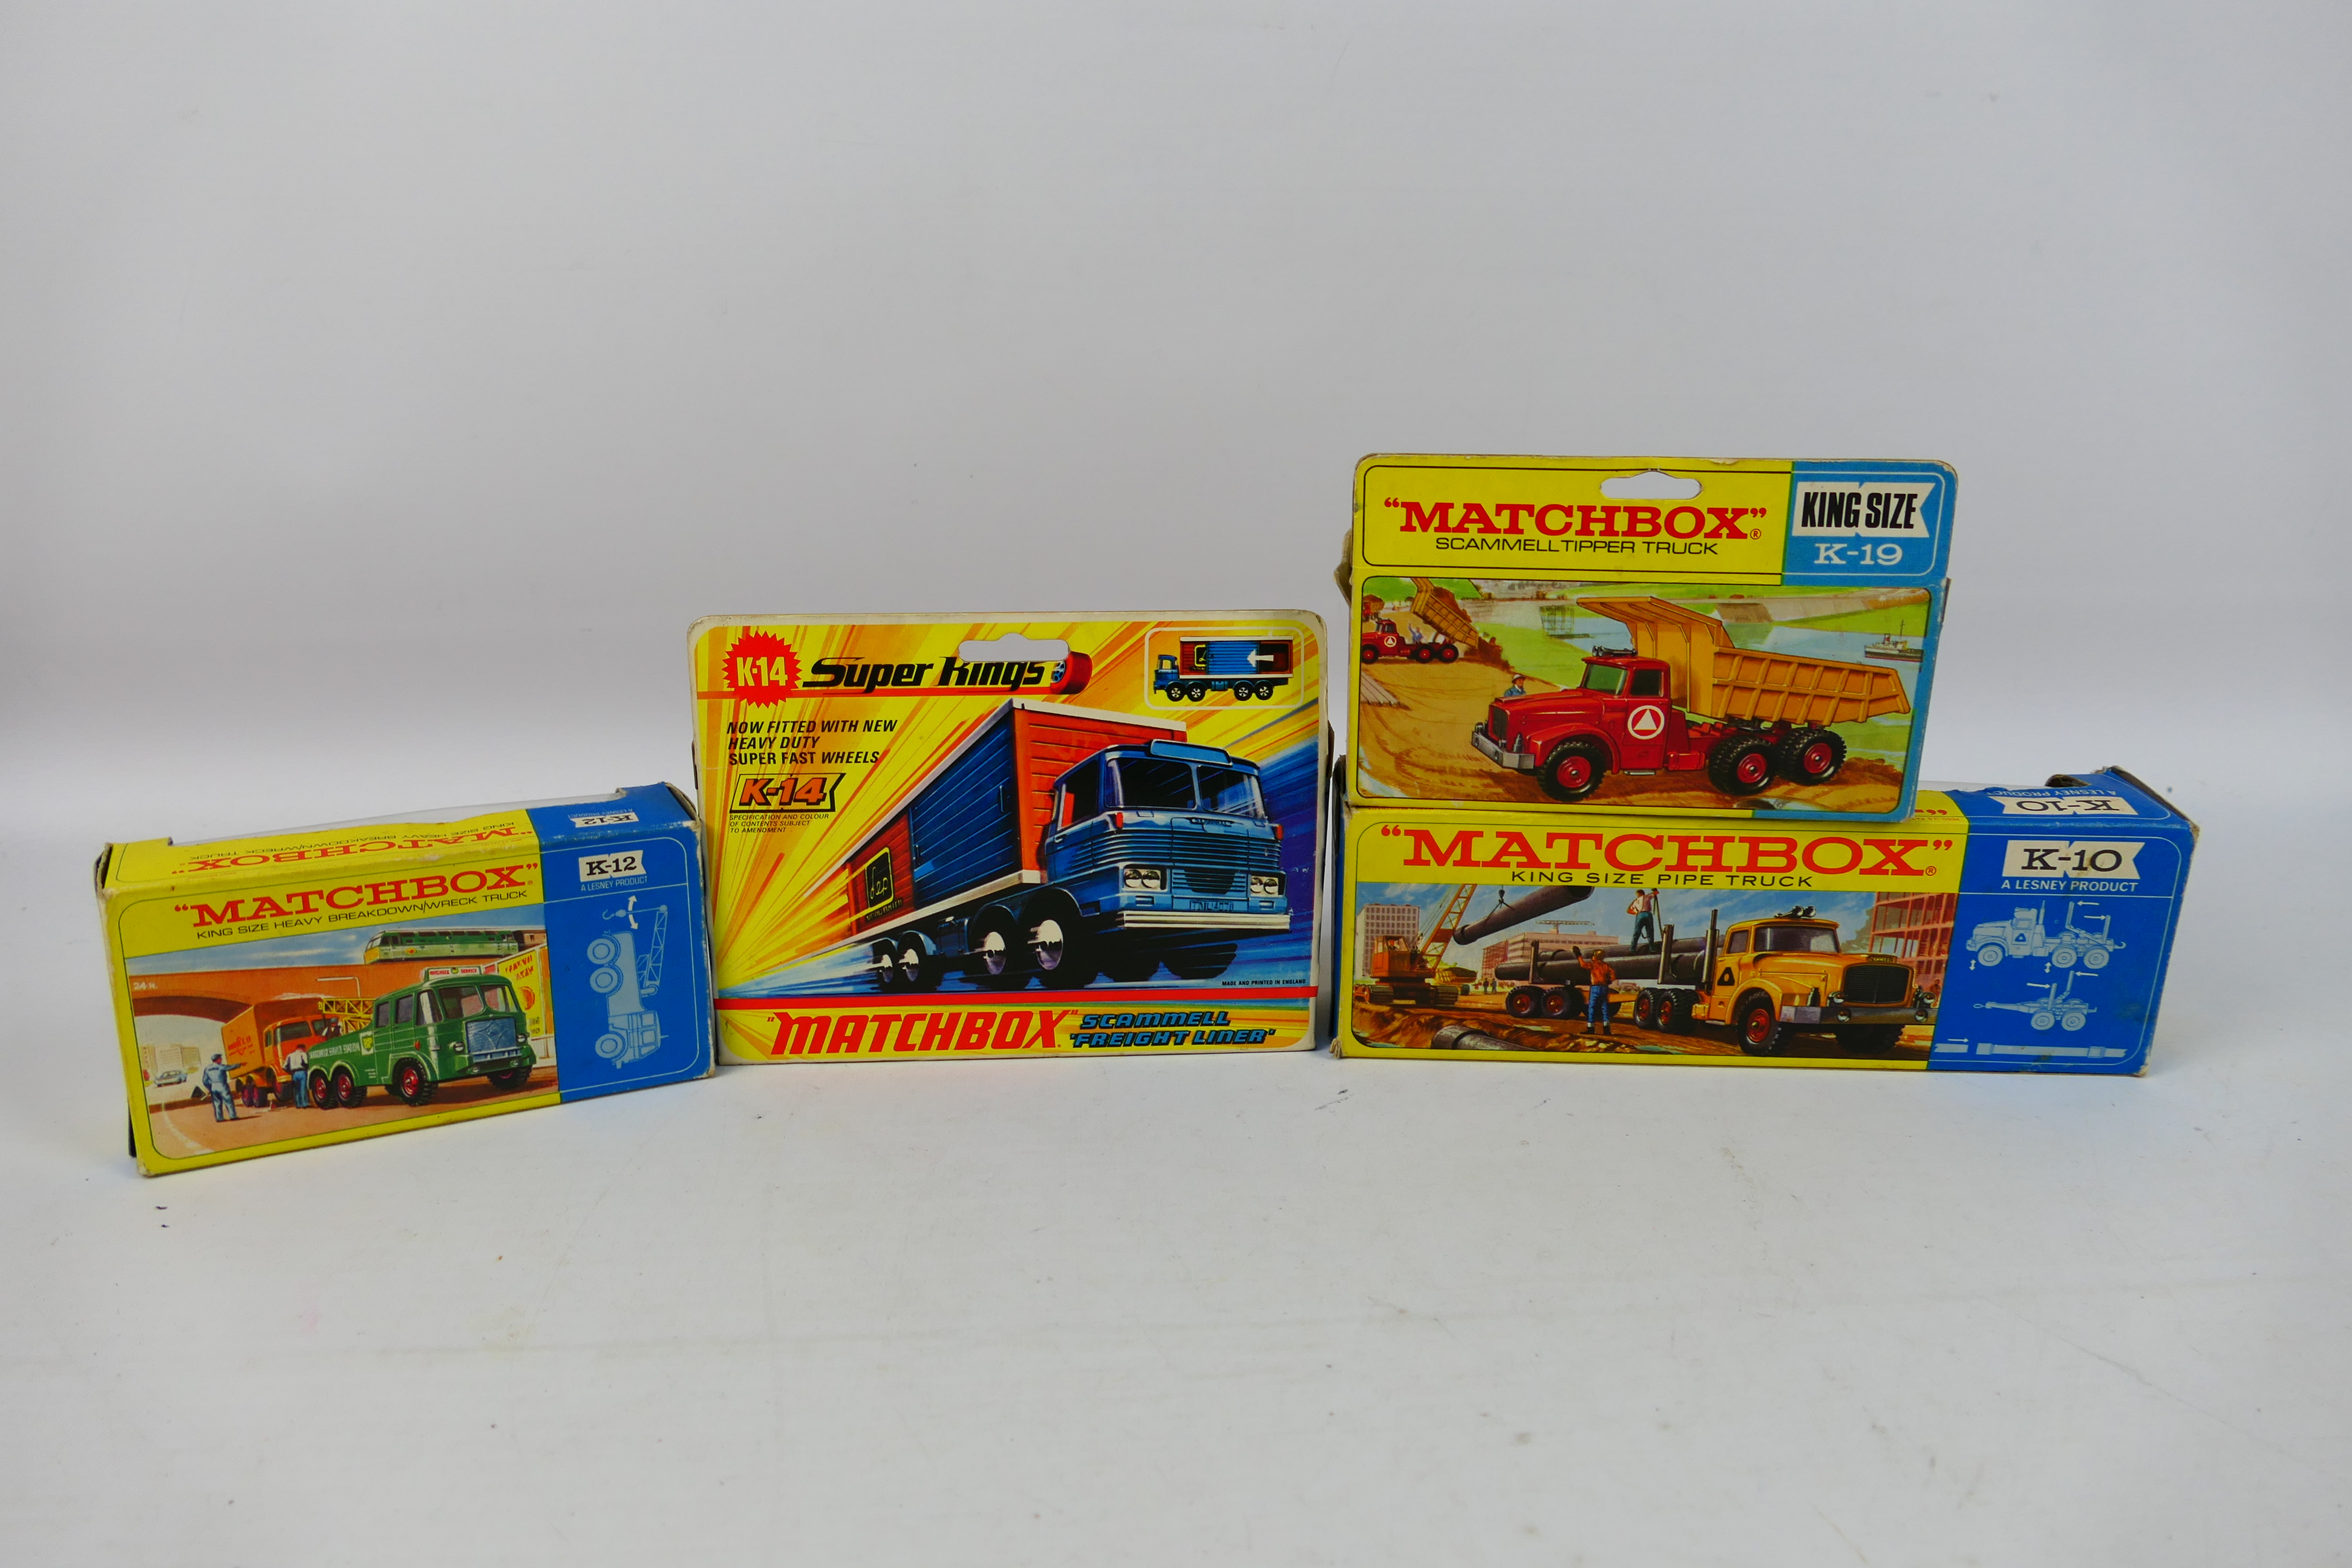 Matchbox - 4 x boxed King Size / Super King models, Scammell tipper truck # K-19, - Image 4 of 4